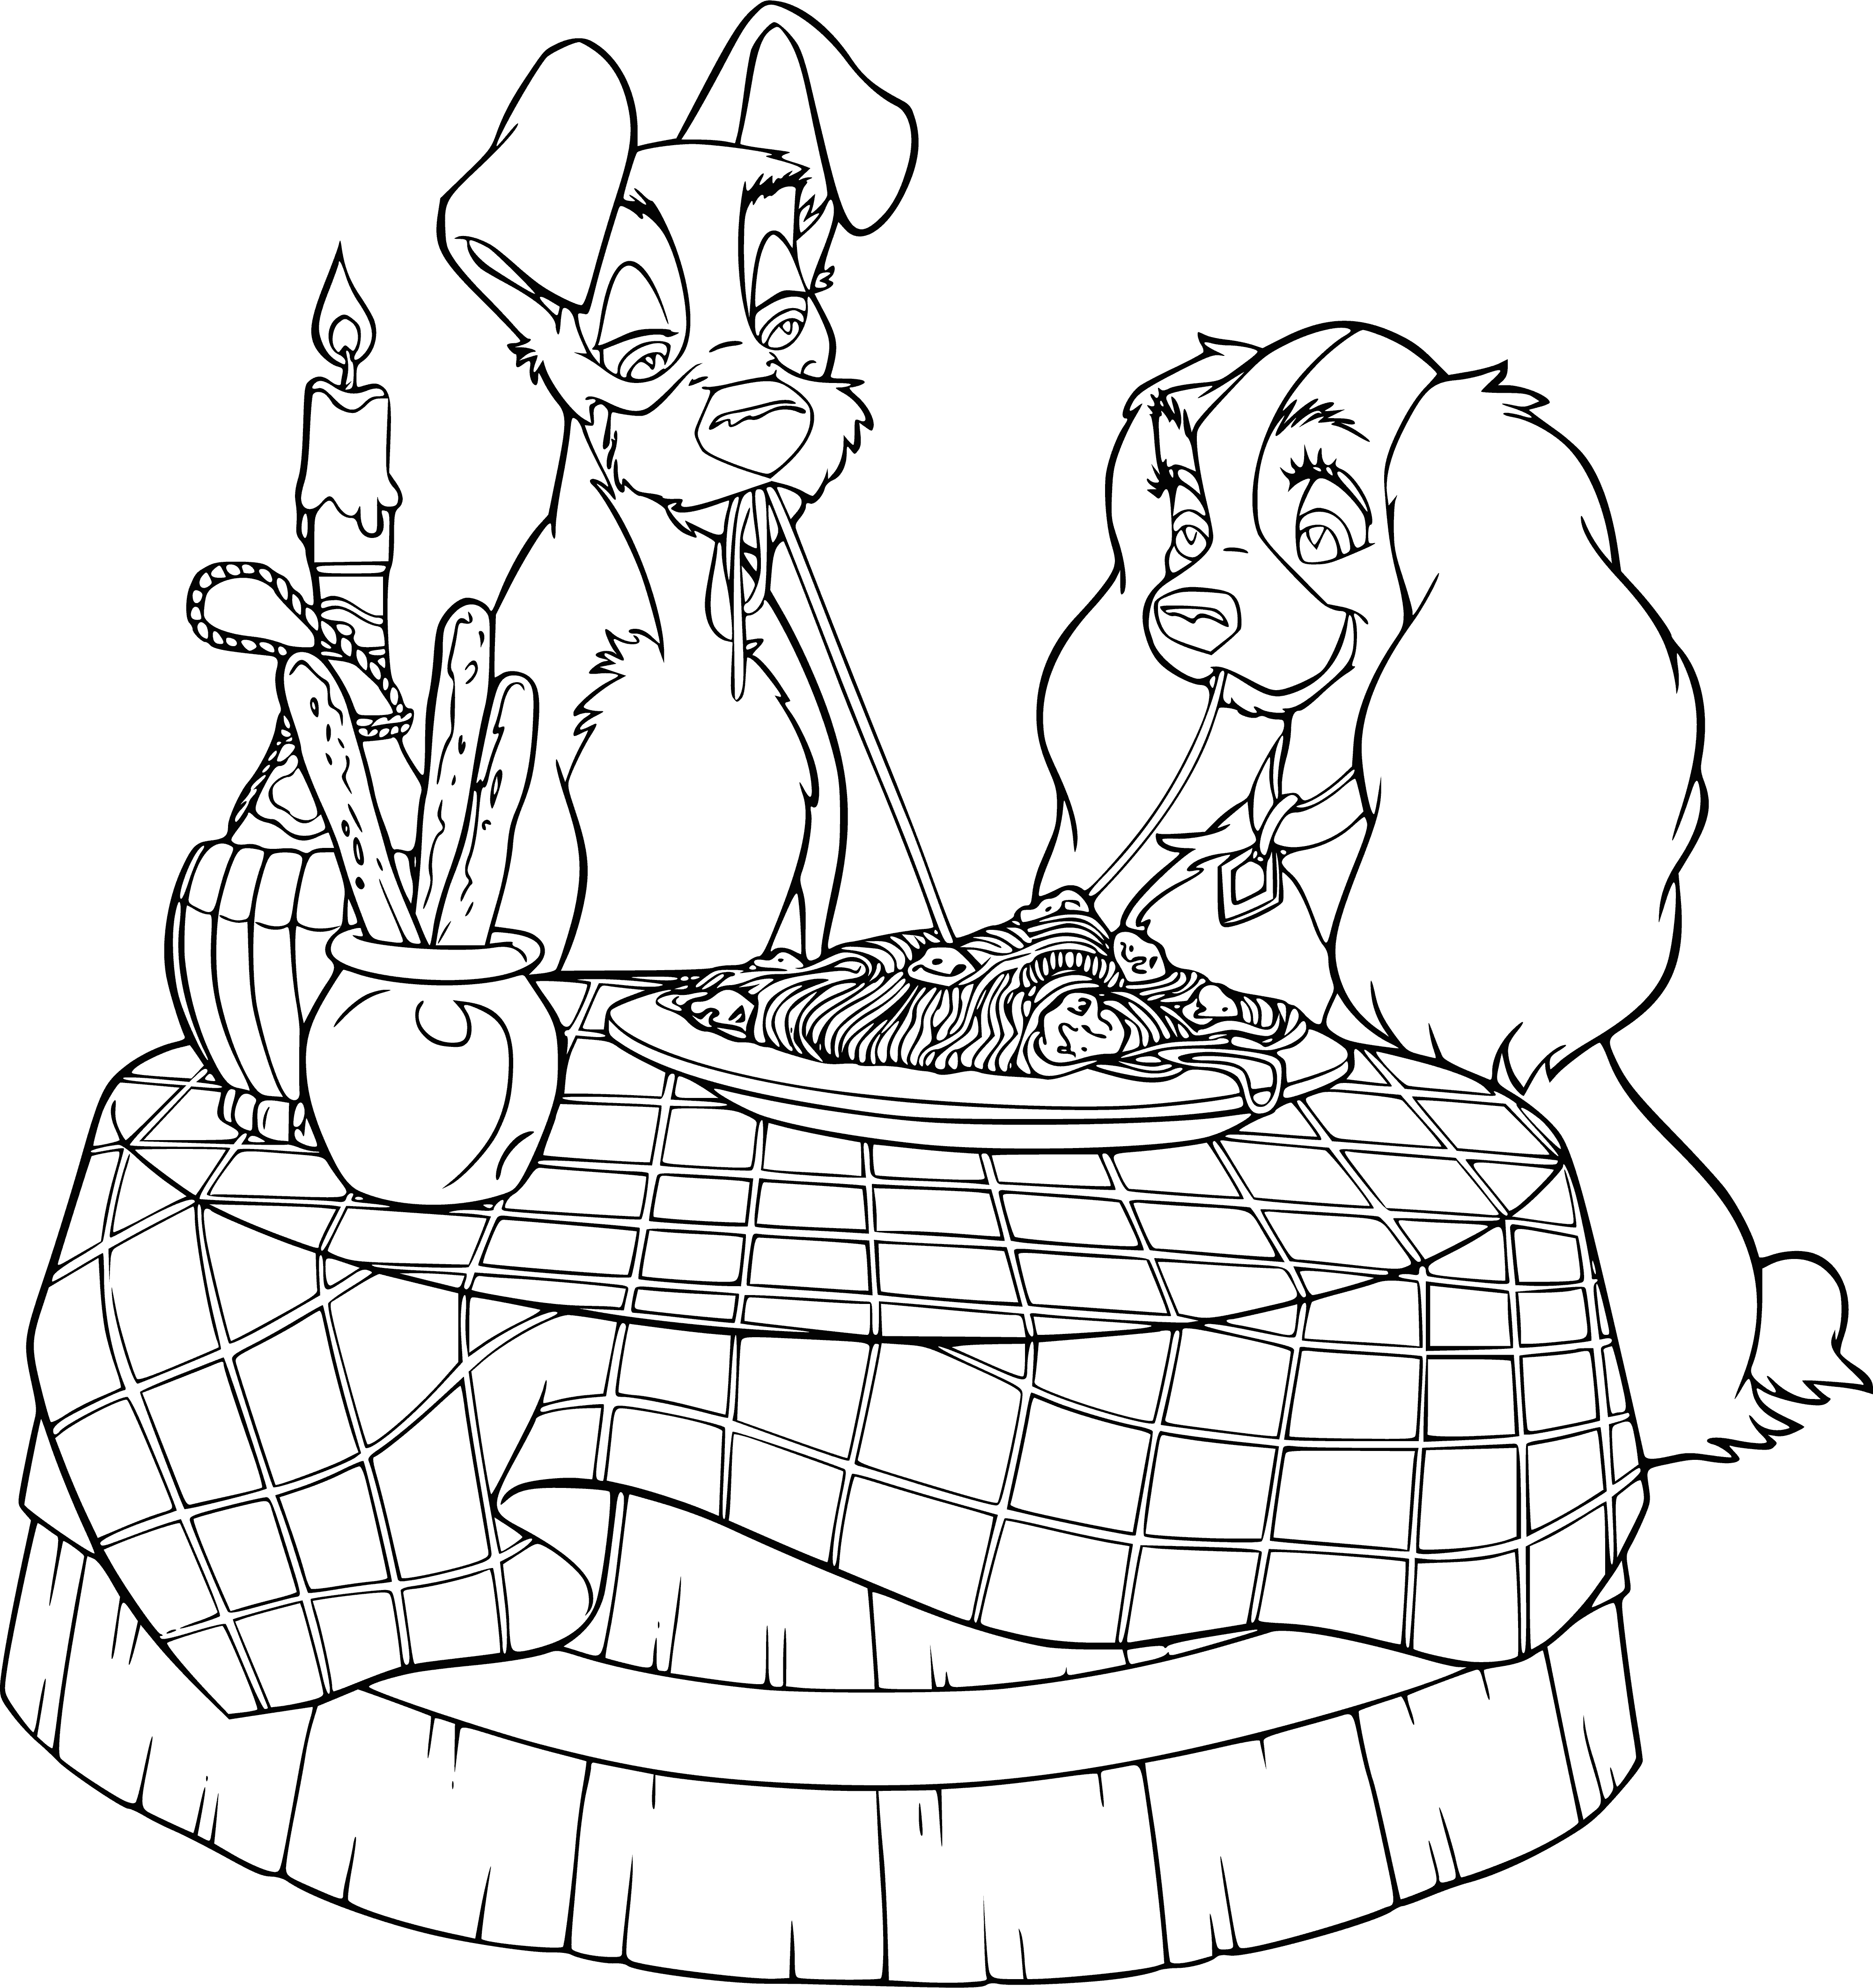 coloring page: Lady and Tramp share romantic dinner, gazing into each other's eyes as they enjoy a plate of spaghetti.